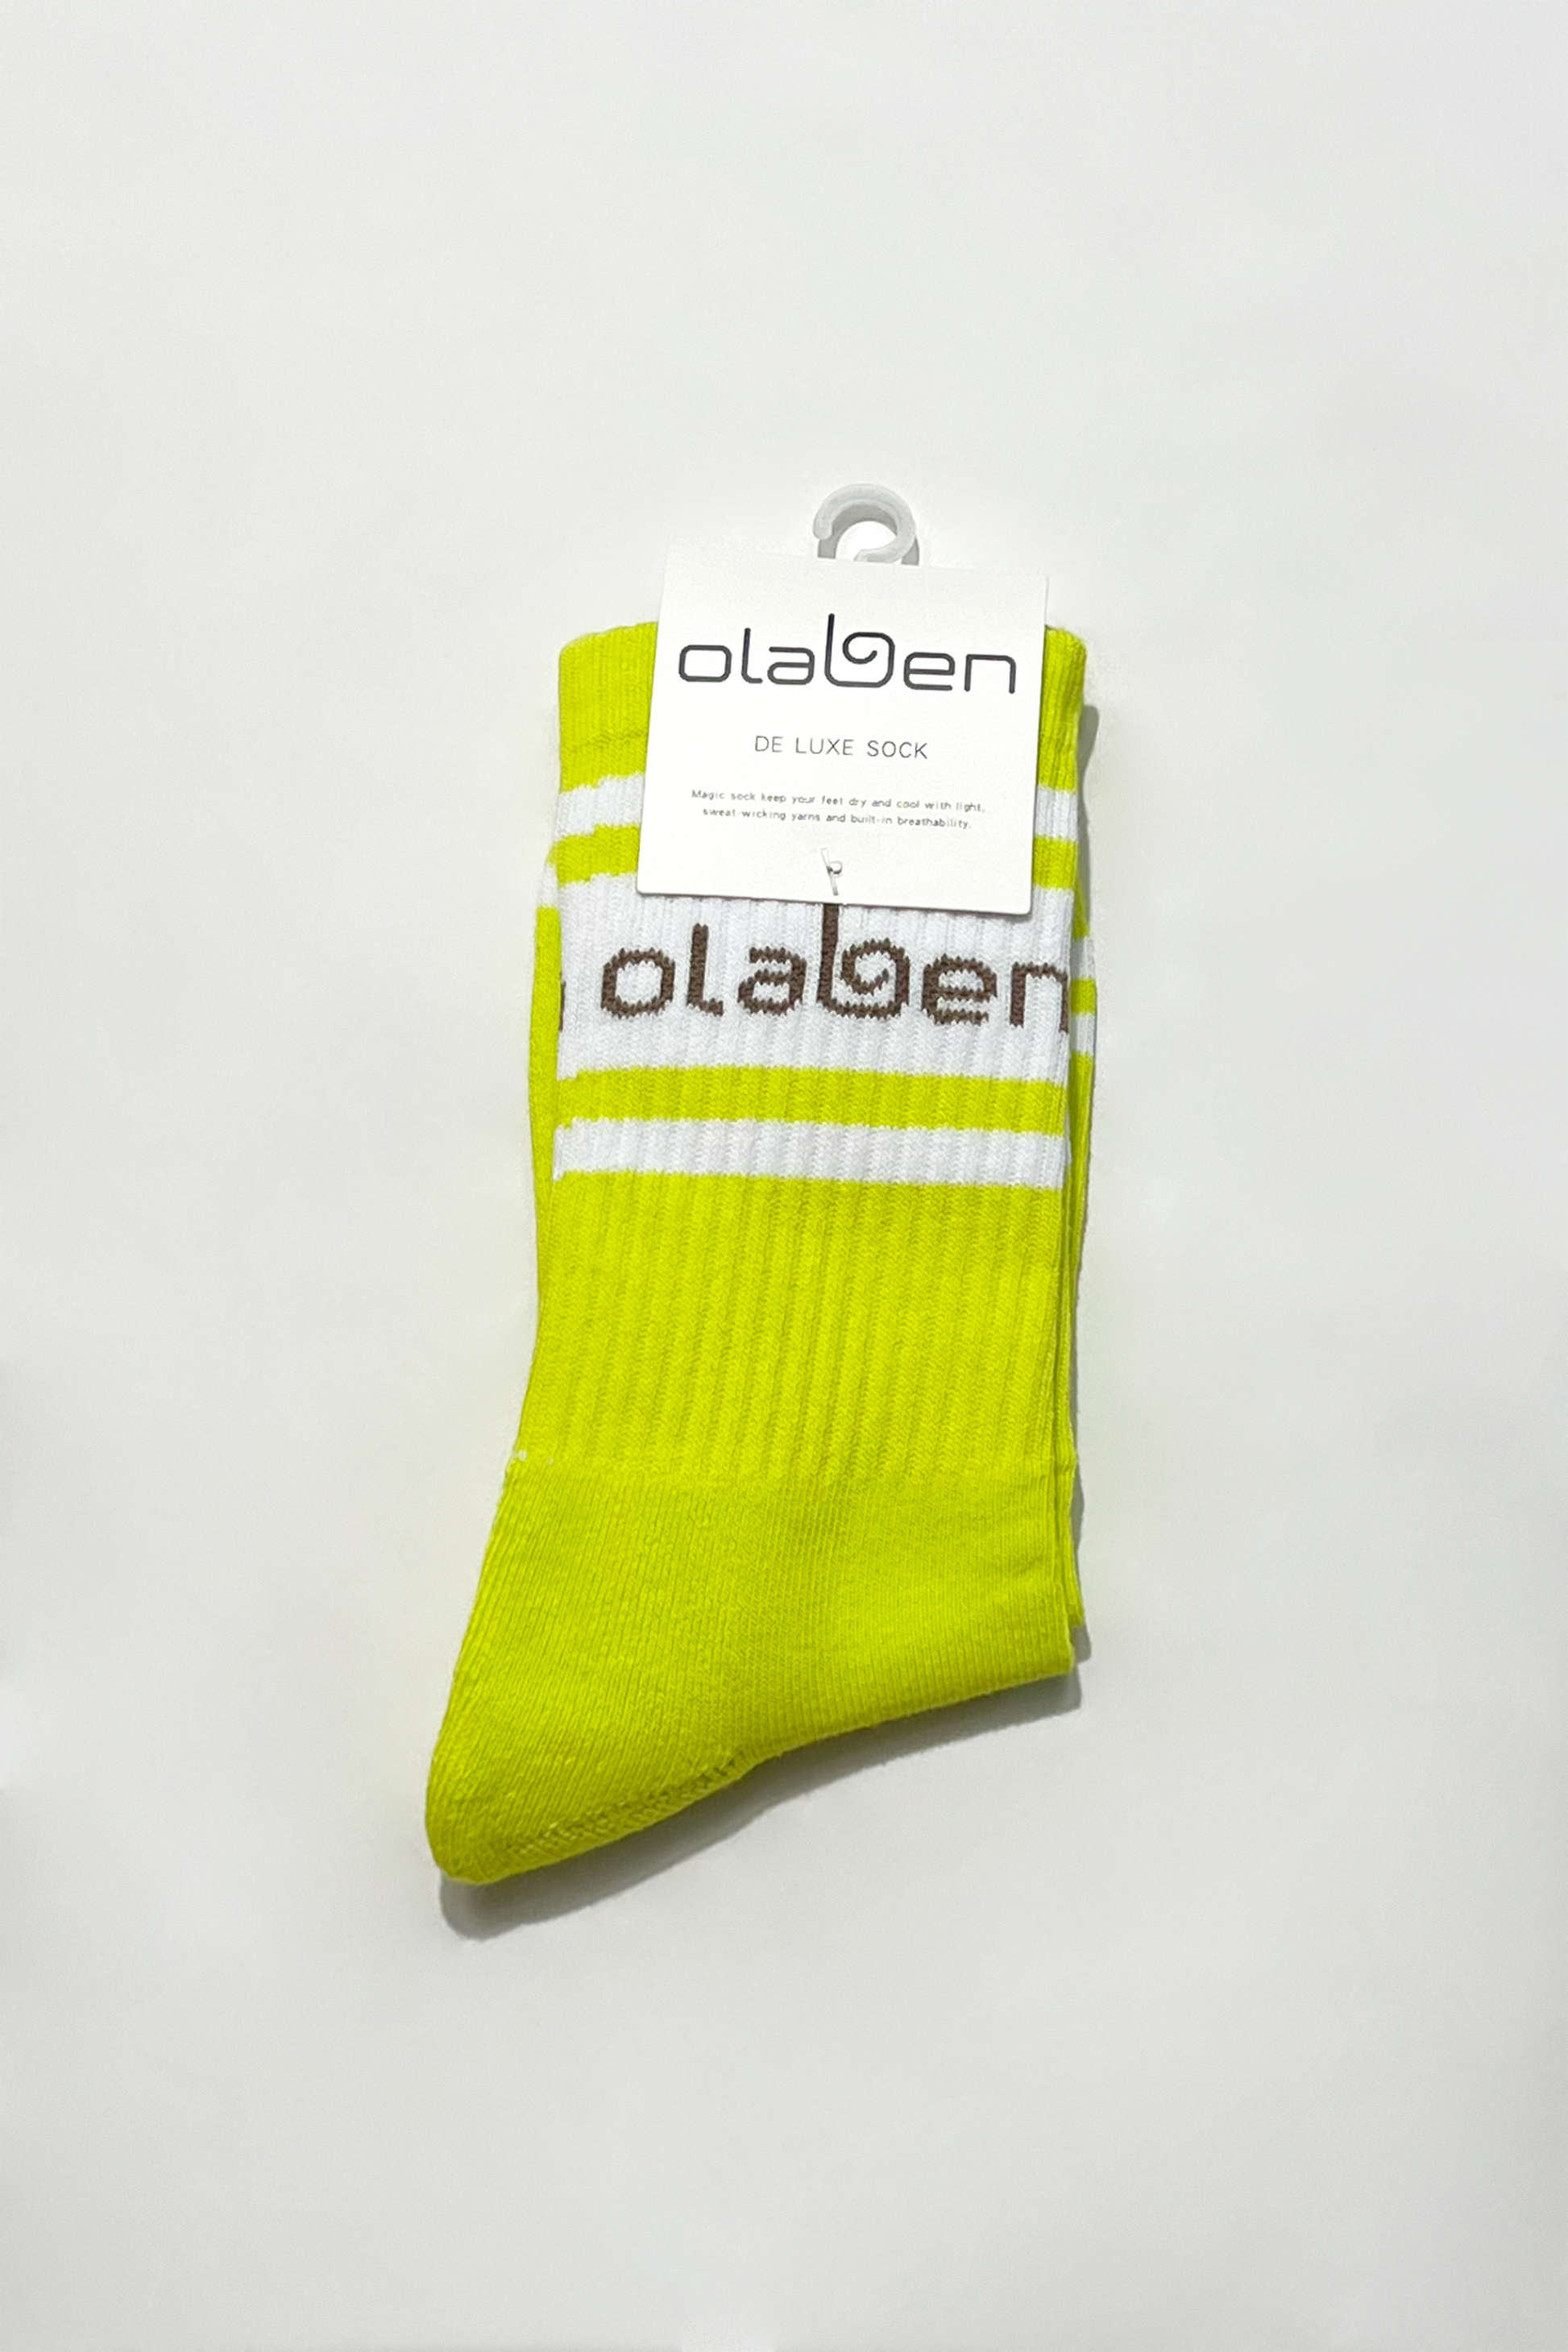 Colorful assortment of socks and lemon tonic in yellow, perfect for cozy quarters.